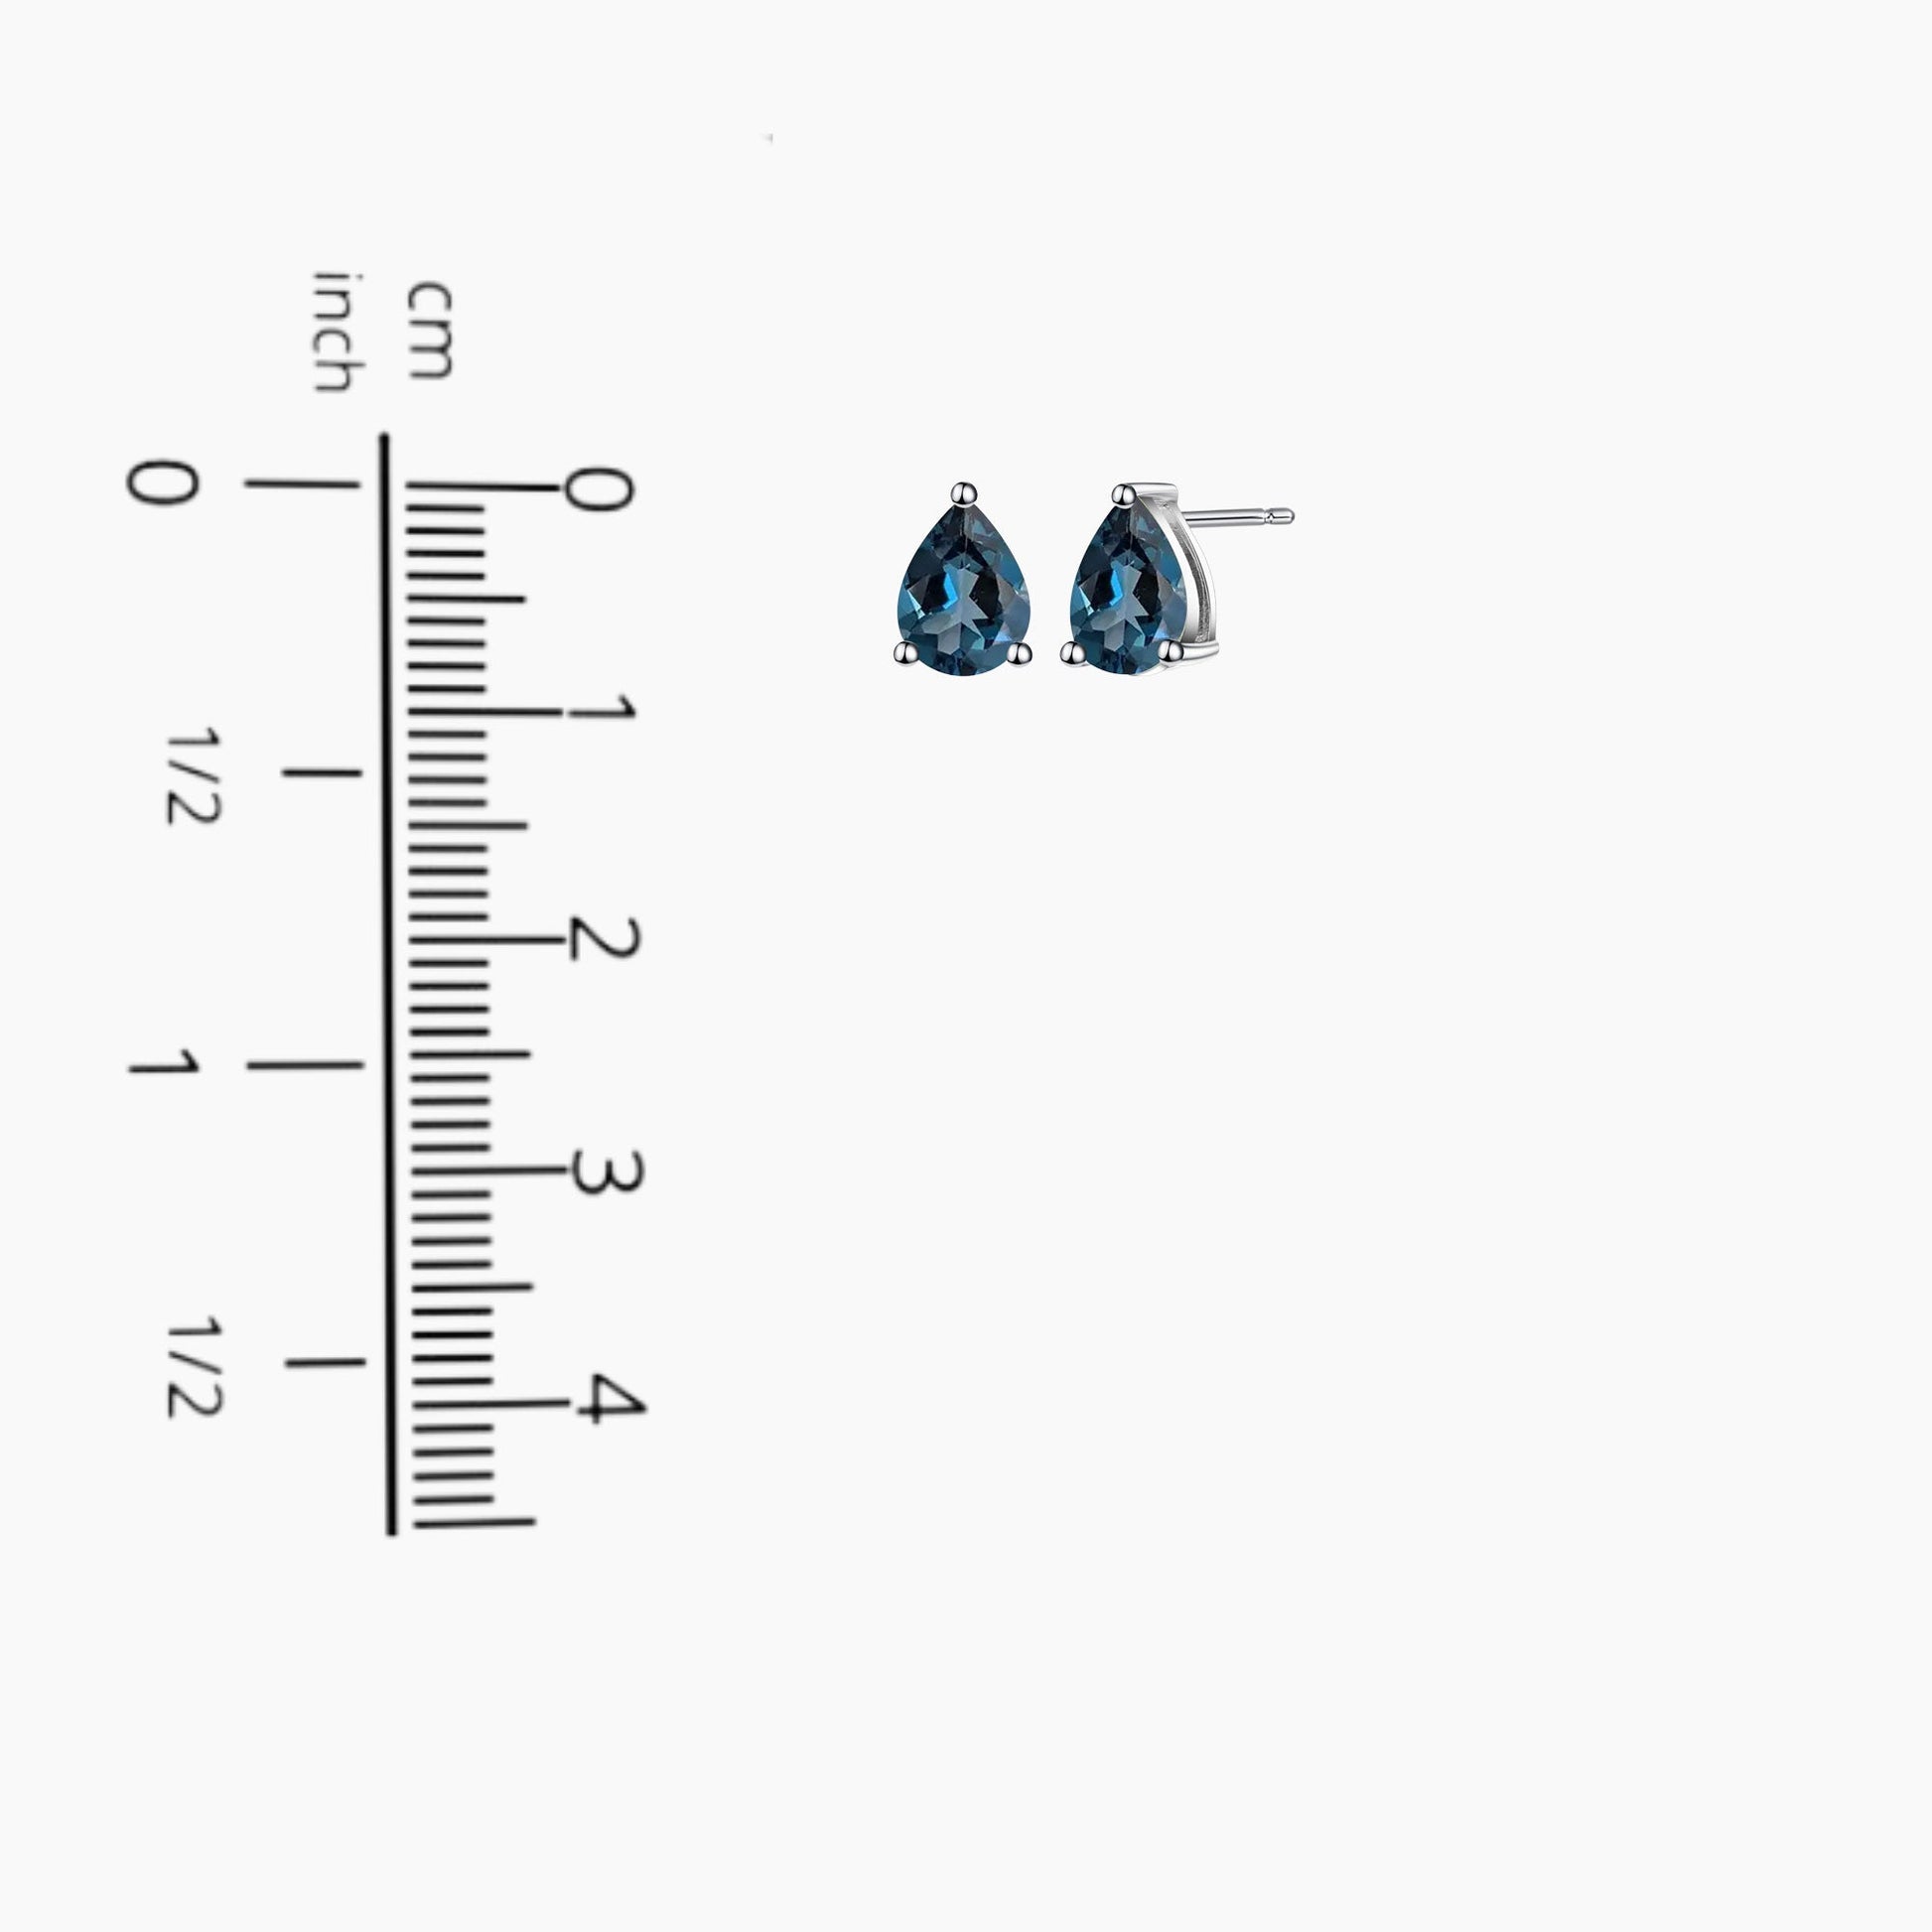 London Blue Topaz Pear Cut Stud Earrings displayed next to a scale for size comparison